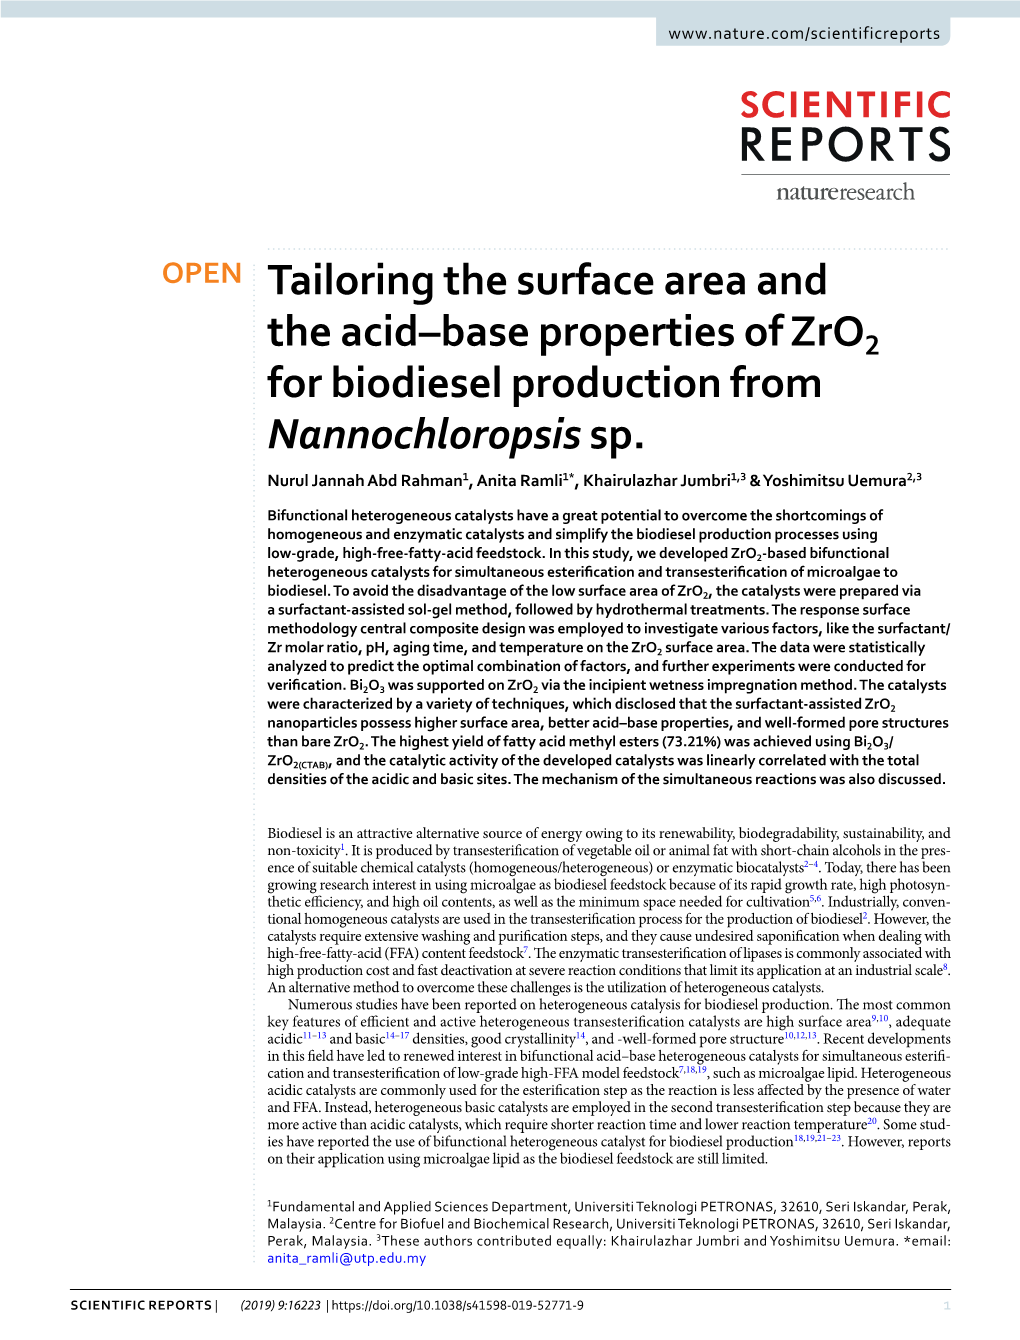 Tailoring the Surface Area and the Acid–Base Properties of Zro2 for Biodiesel Production from Nannochloropsis Sp